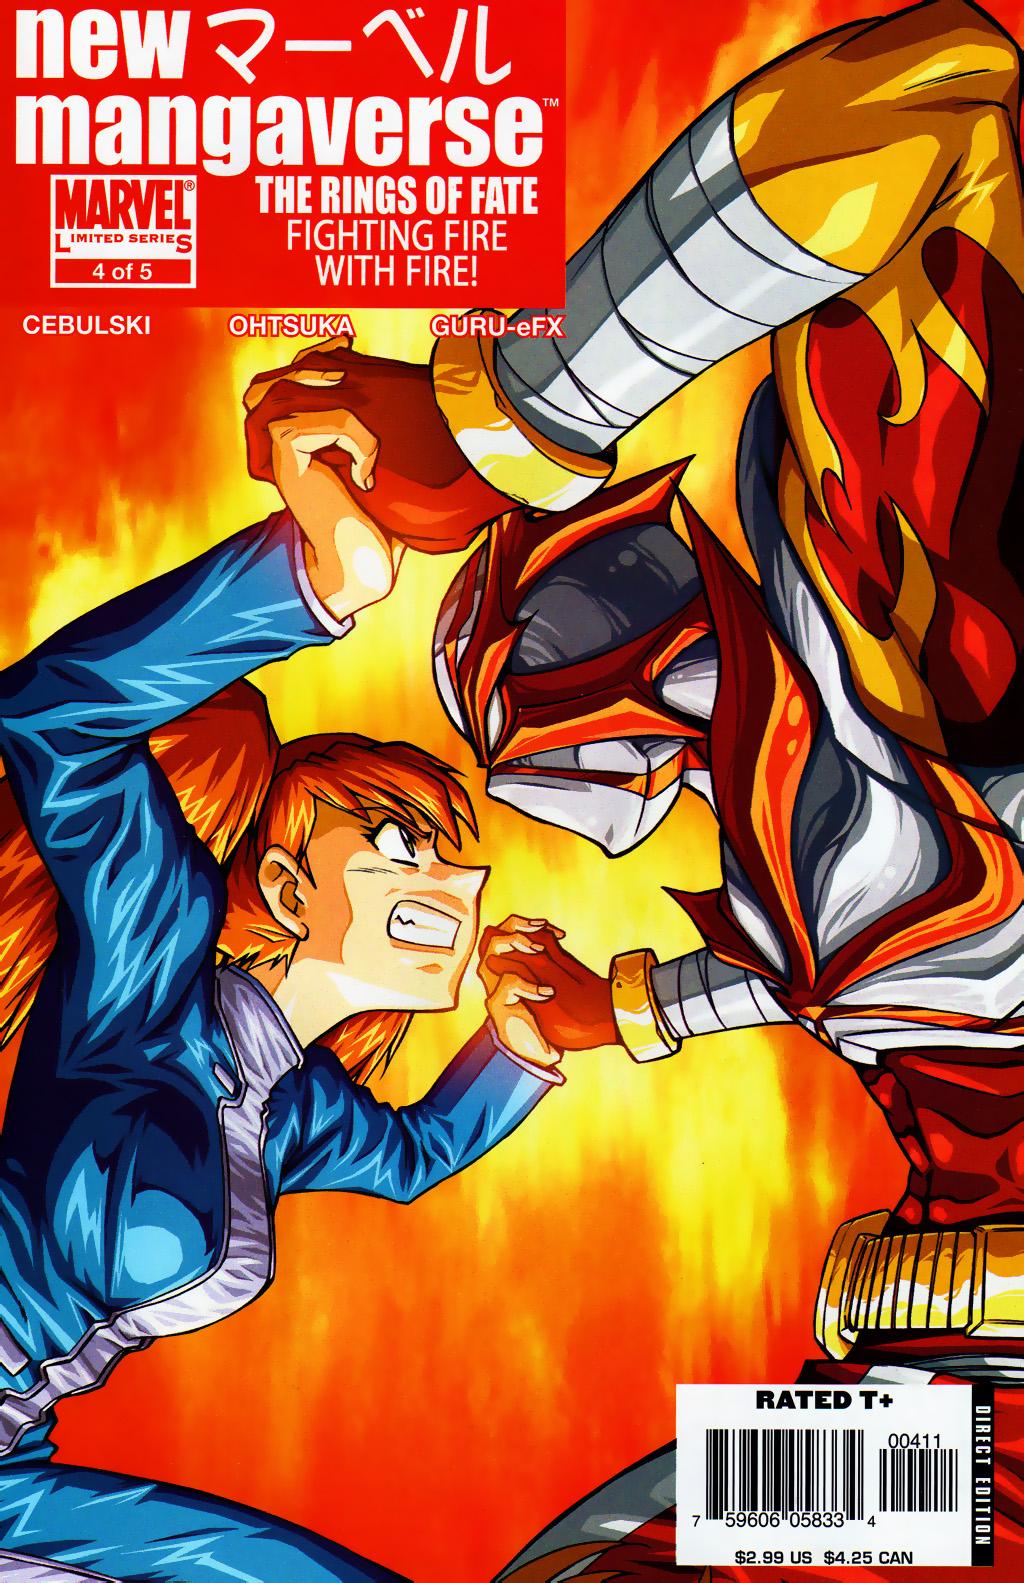 New Mangaverse: The Rings of Fate Vol. 1 #4